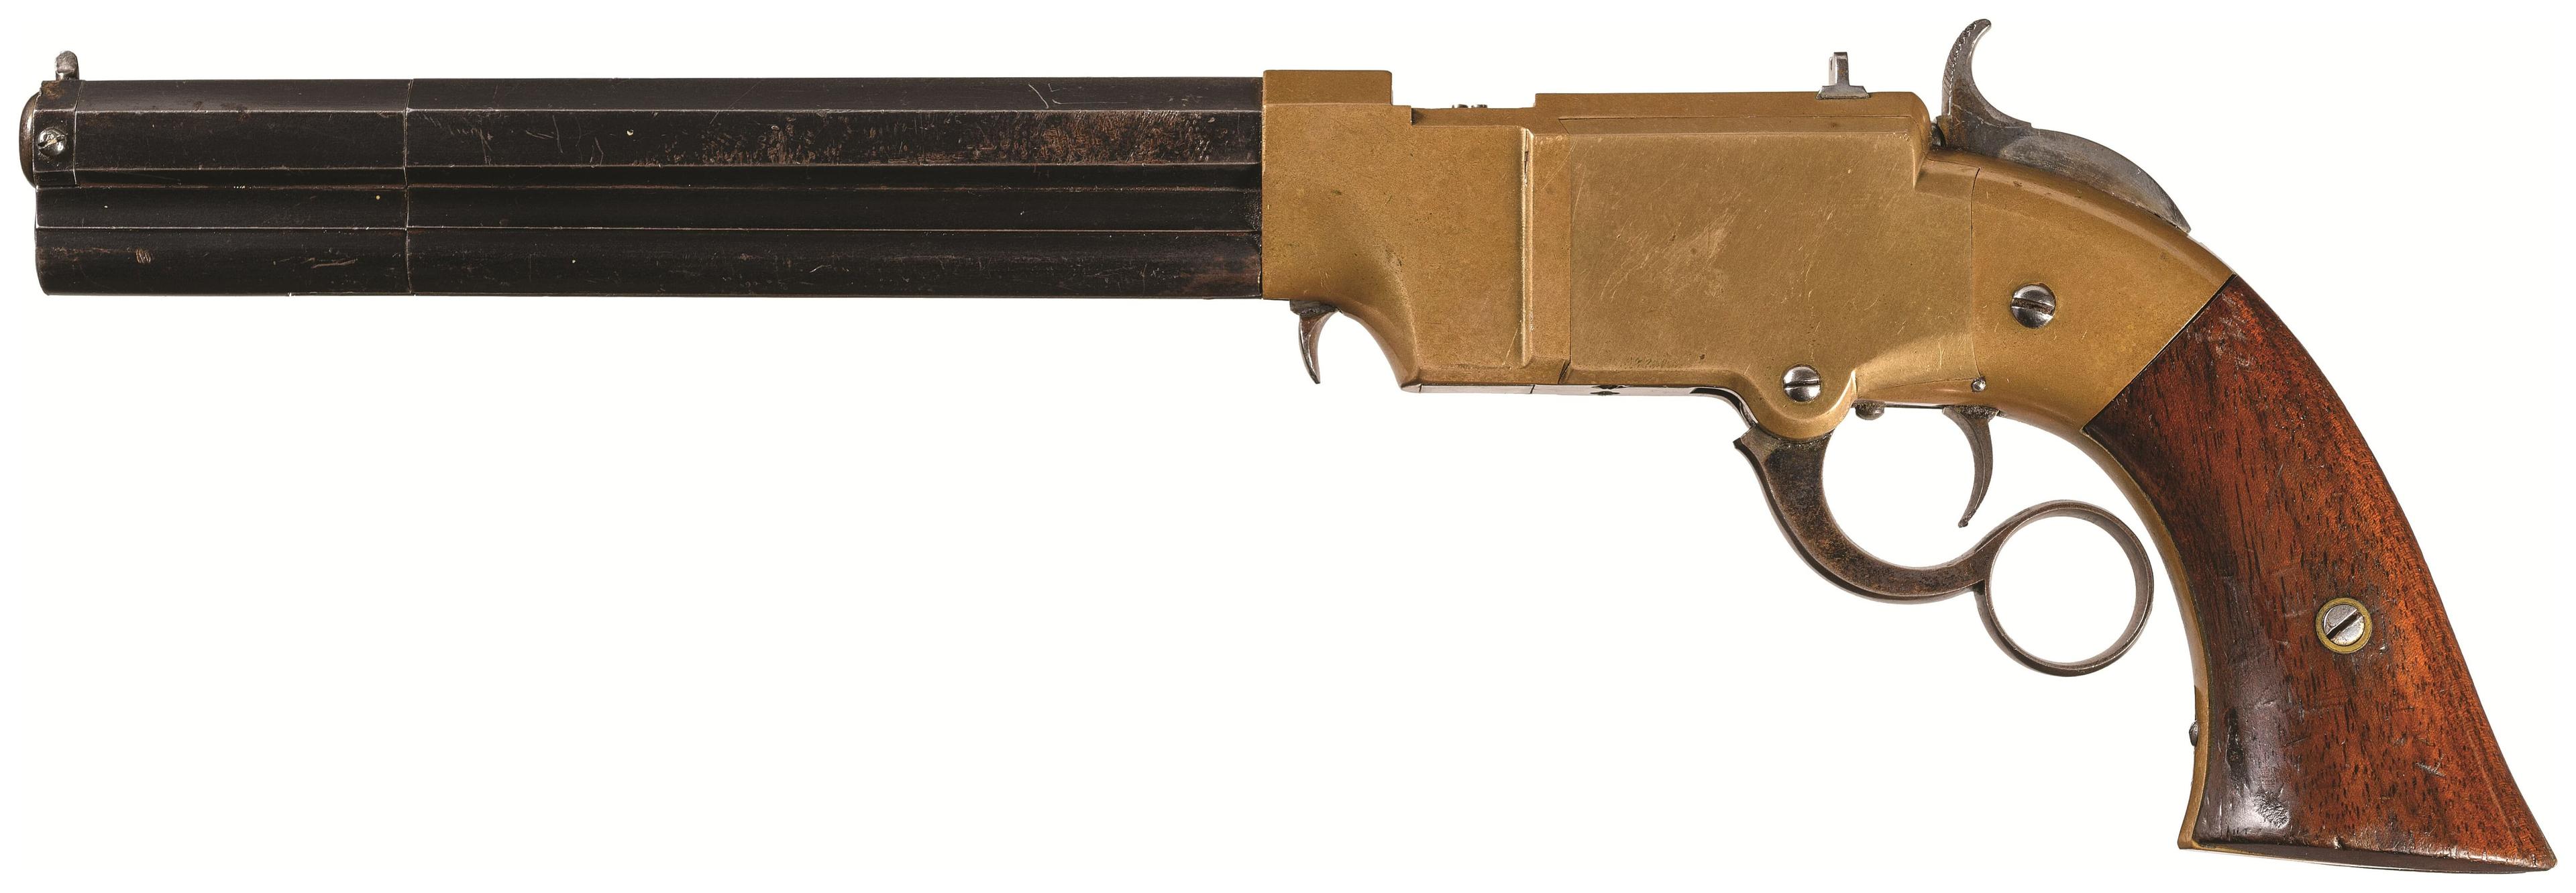 Volcanic Repeating Arms Company Lever Action Navy Pistol